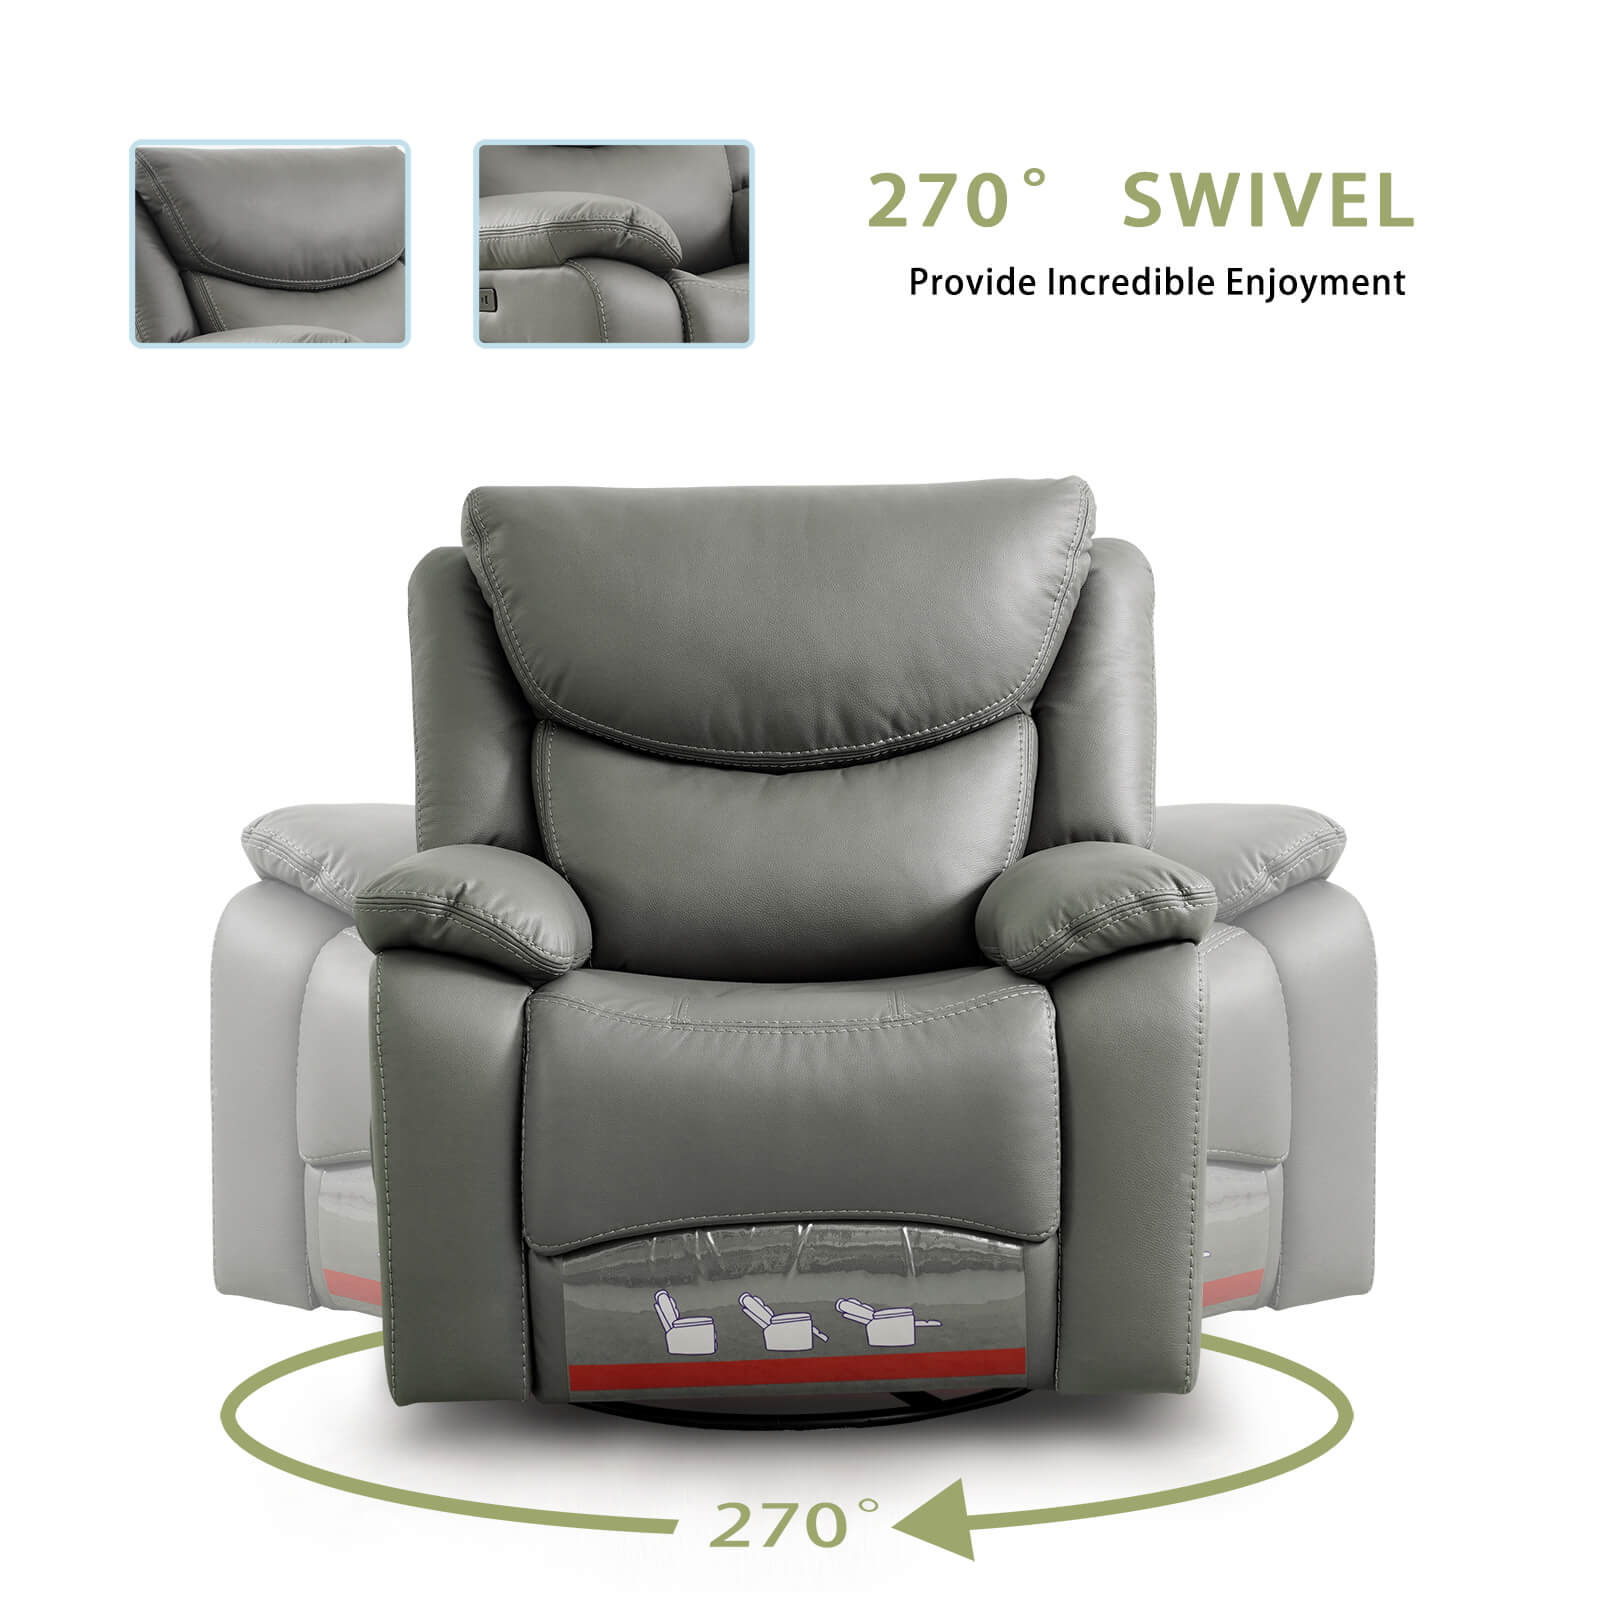 Soulout Swivel Glider Rocking Recliner Power Reclining Chair 270 swivel